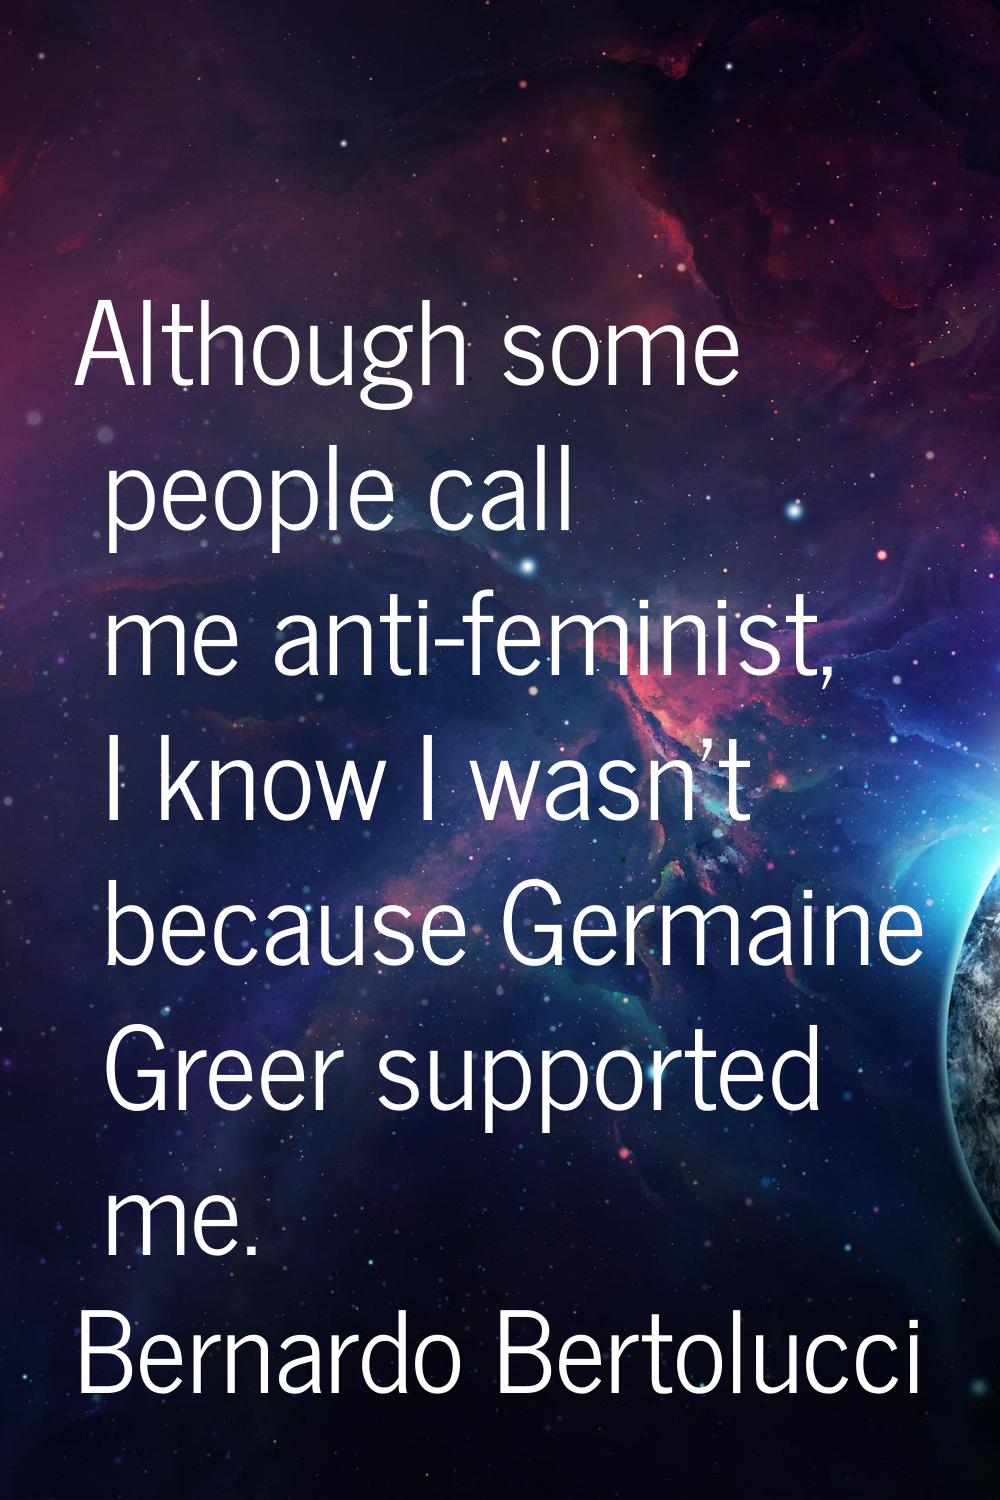 Although some people call me anti-feminist, I know I wasn't because Germaine Greer supported me.